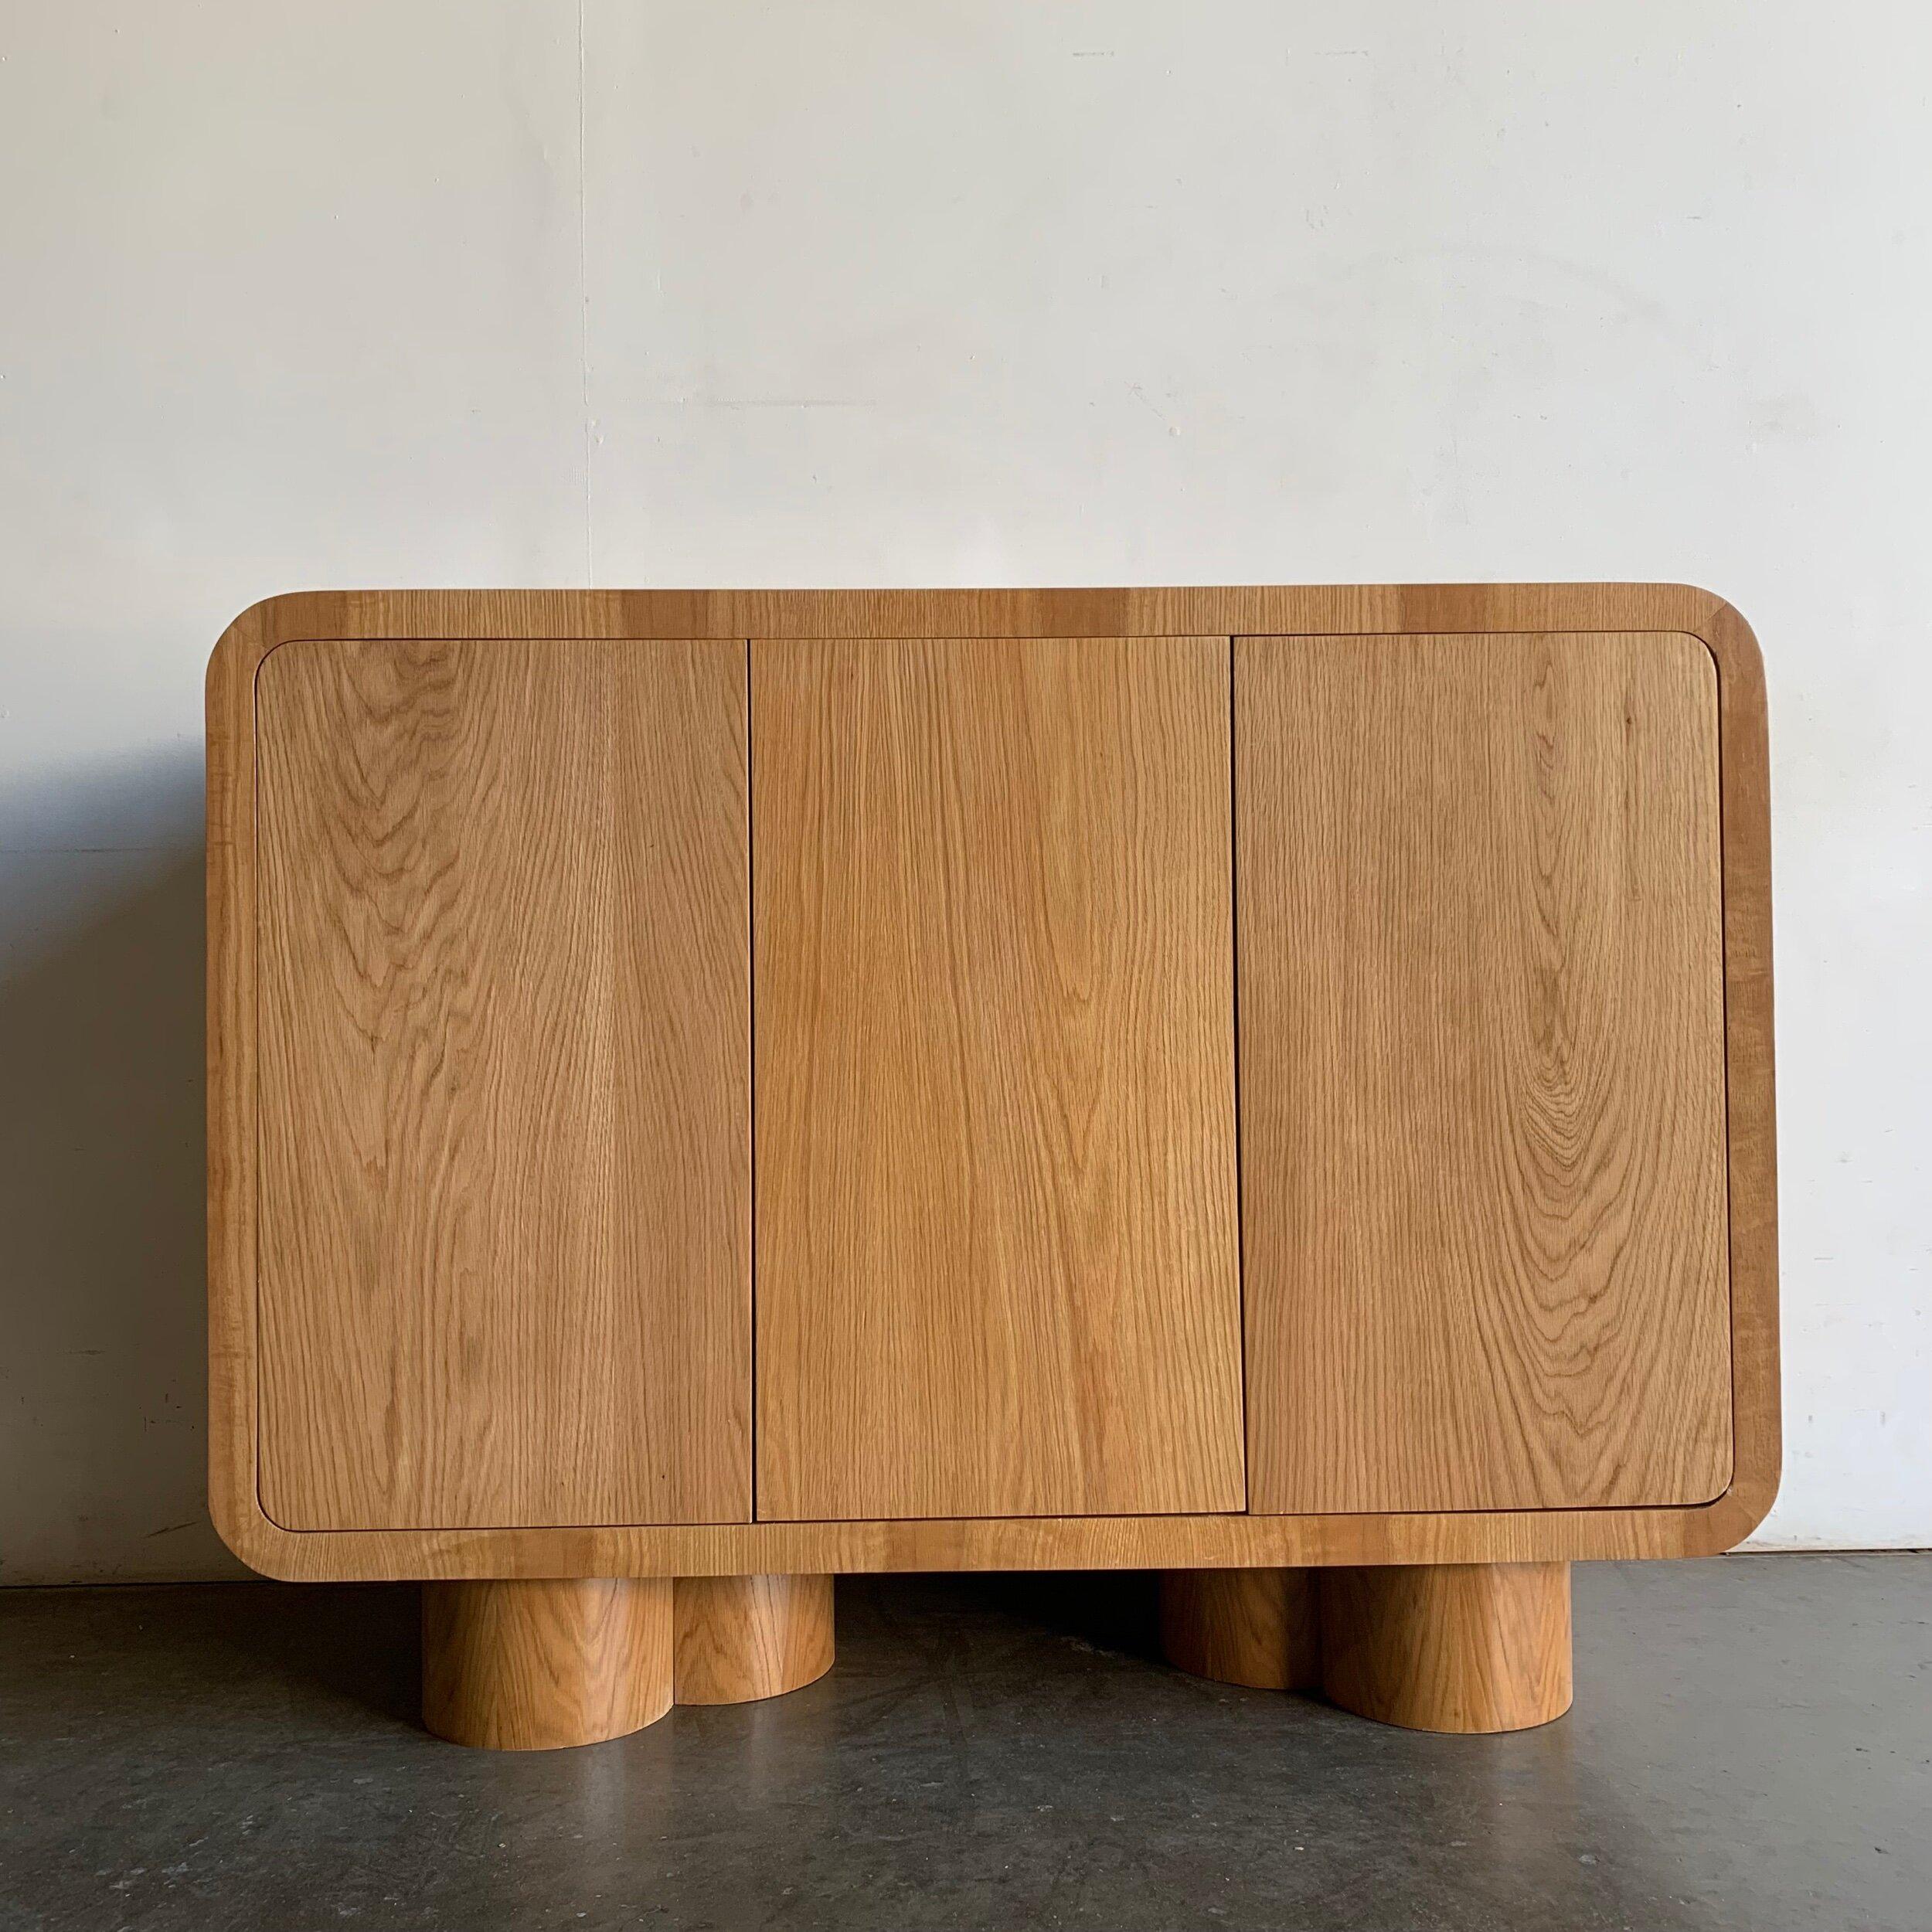 Made in house by Vintage On Point this large sideboard is made of solid and veneered white rift oak. This item features nice grain throughout , curved waterfall sides edges, sits on three merged cylinder legs, and has push open doors.